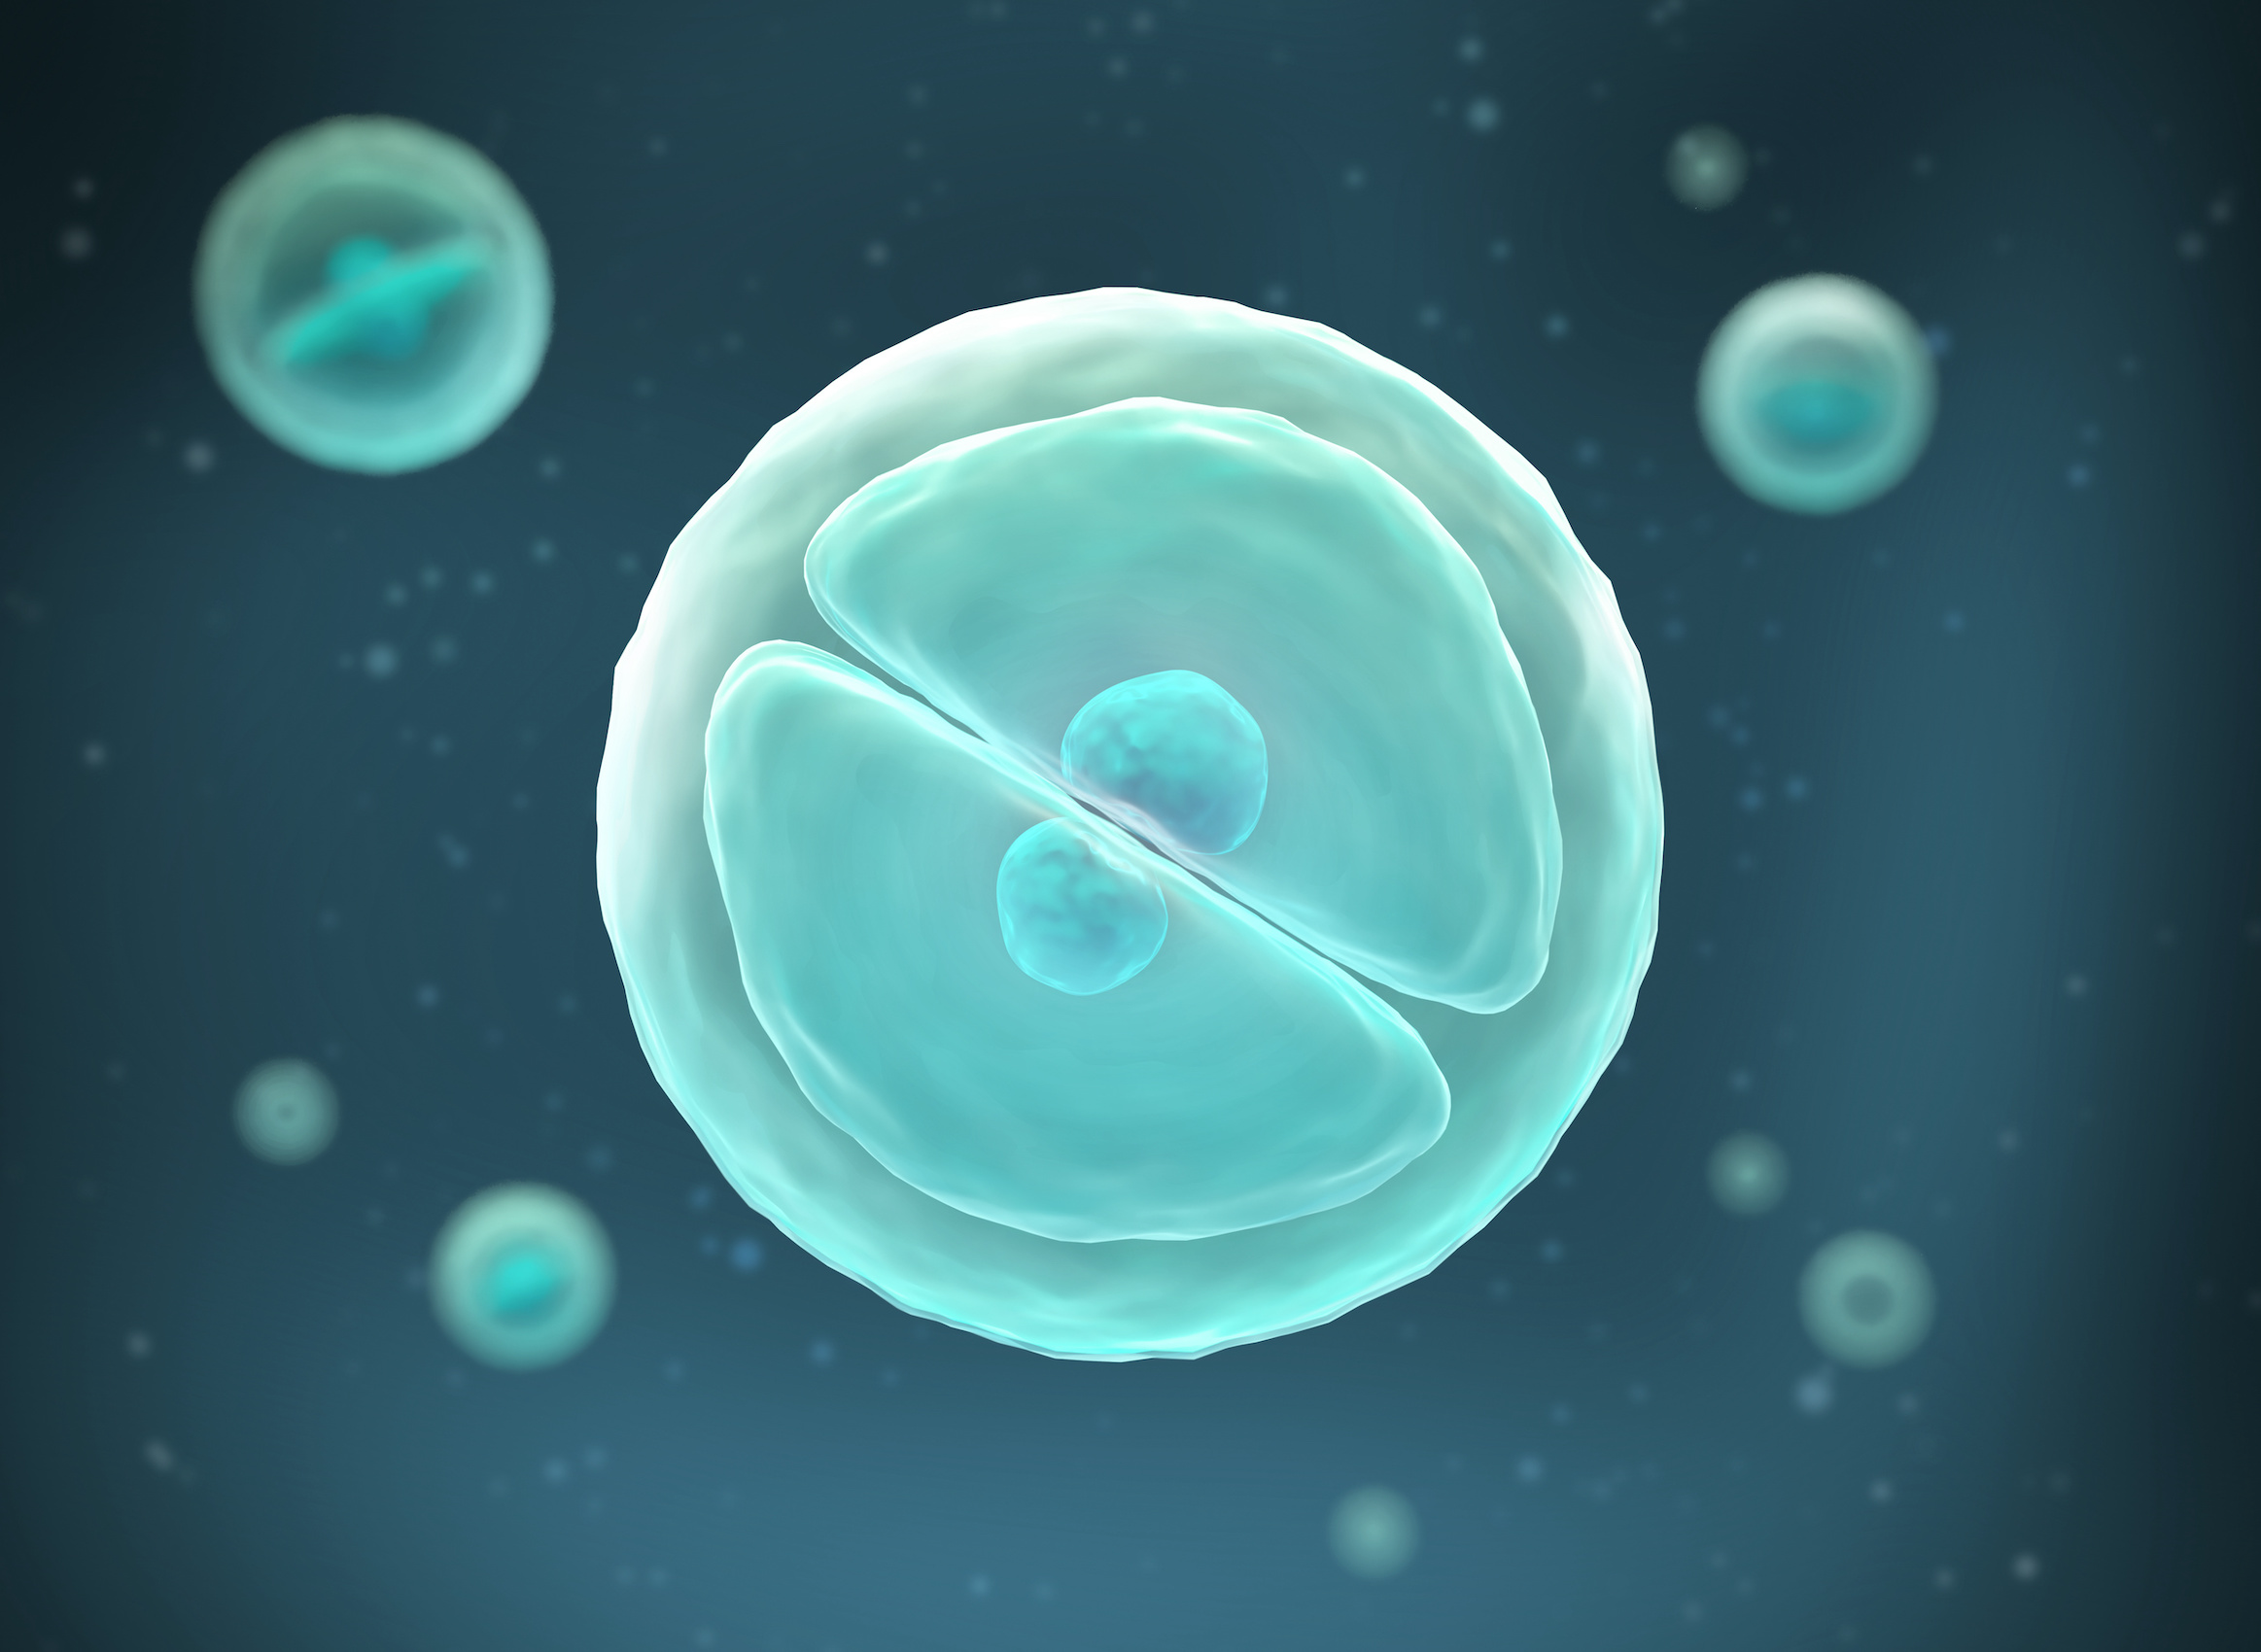 Human cell or Embryonic stem cell microscope blue background, 3d illustration.